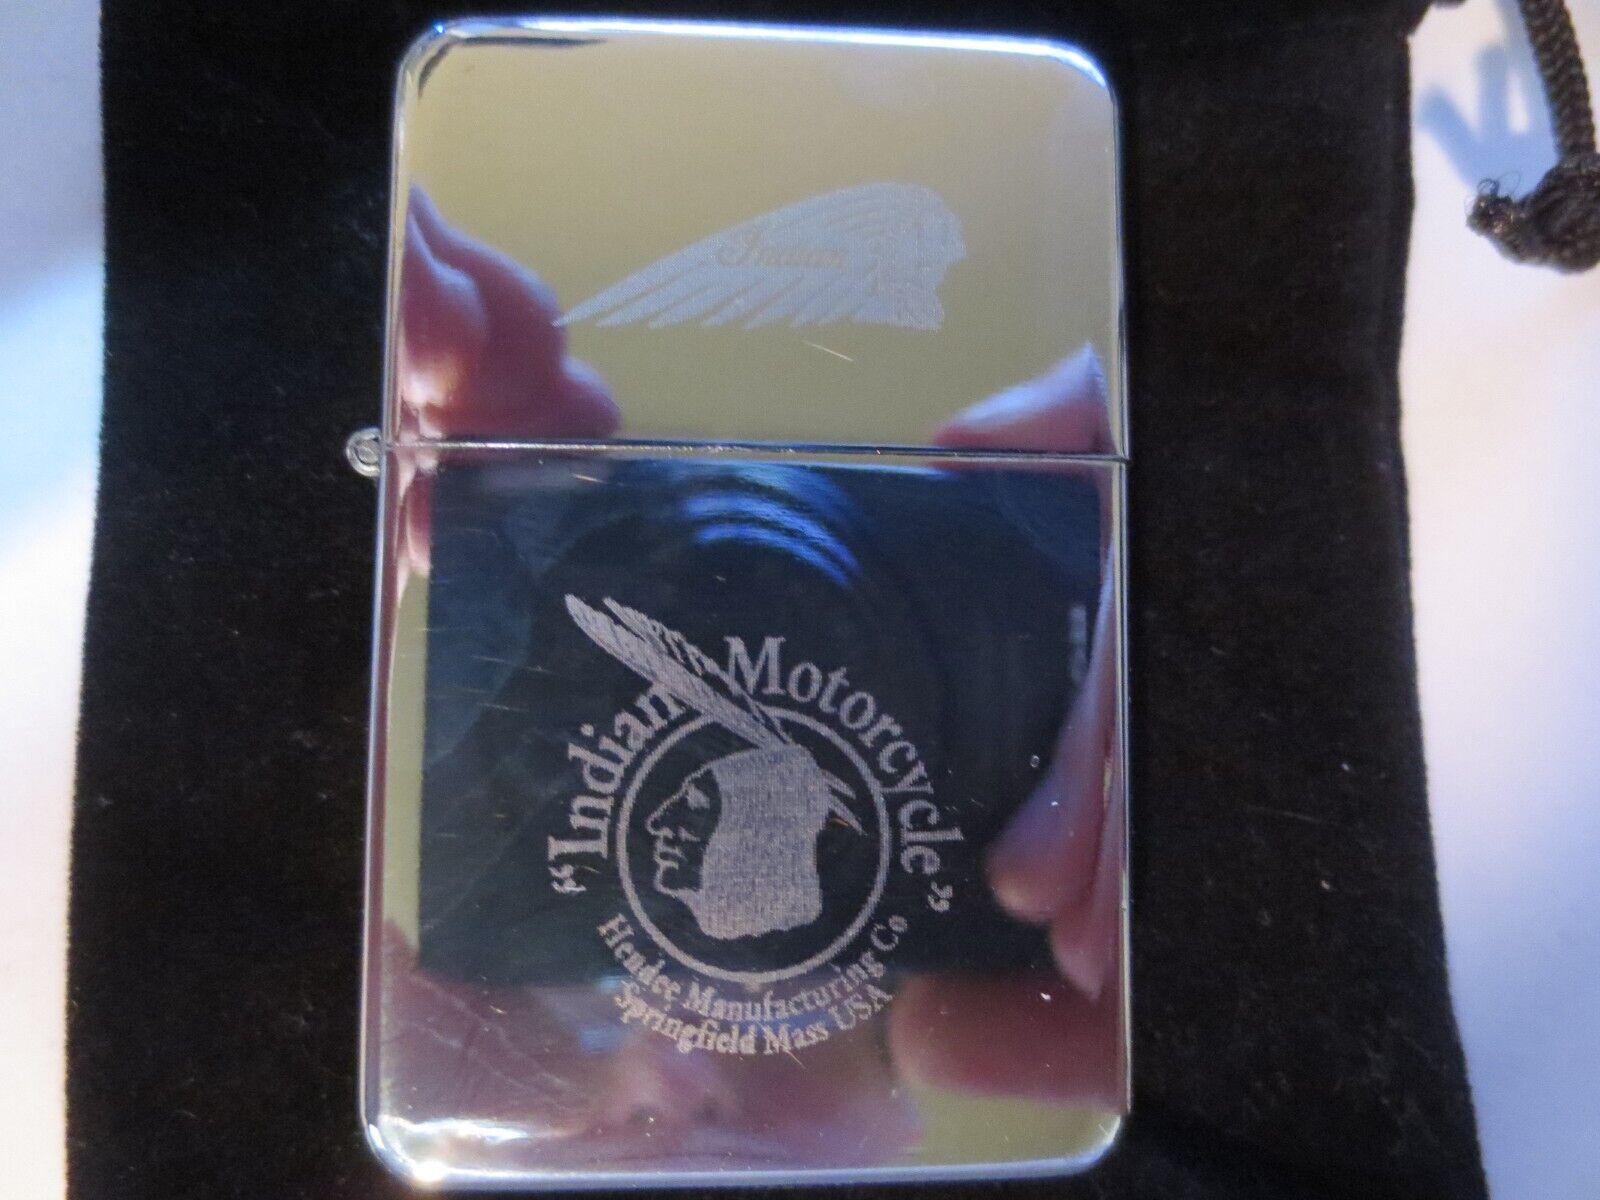 Indian Motorcycle Engraved Windproof Lighter.